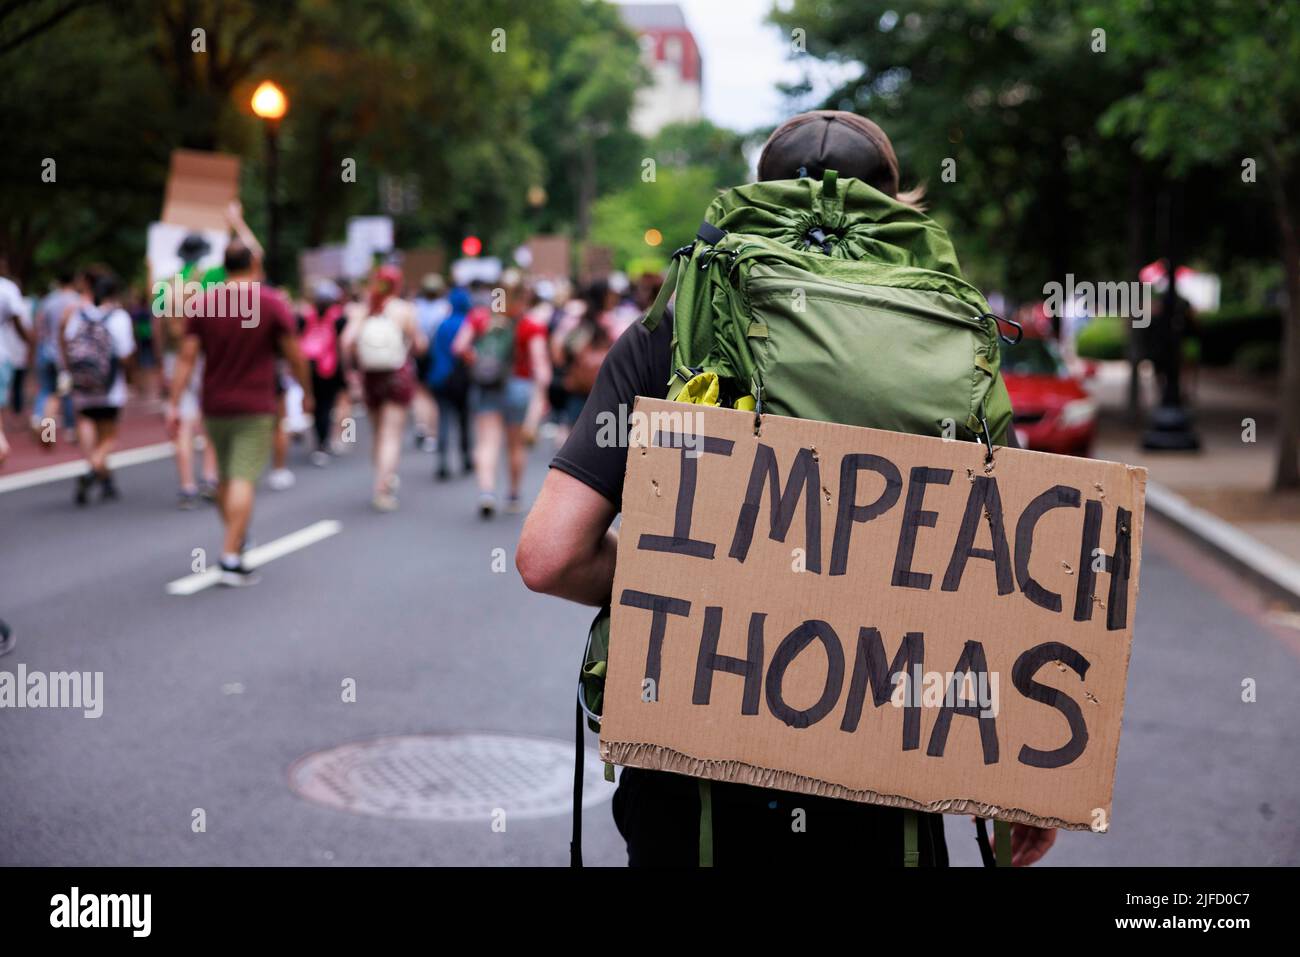 WASHINGTON, DISTRICT OF COLUMBIA - JUNE 26: An abortion-rights activist carrying a sign reading, “Impeach Thomas,” marches from the Supreme Court of the United States to the White House in protest two days after a conservative majority struck down Roe v Wade, on June 26, 2022 in Washington, District of Columbia. The Court's decision in Dobbs v Jackson Women's Health overturns the landmark 50-year-old Roe v Wade case and erases a federal right to an abortion. Stock Photo